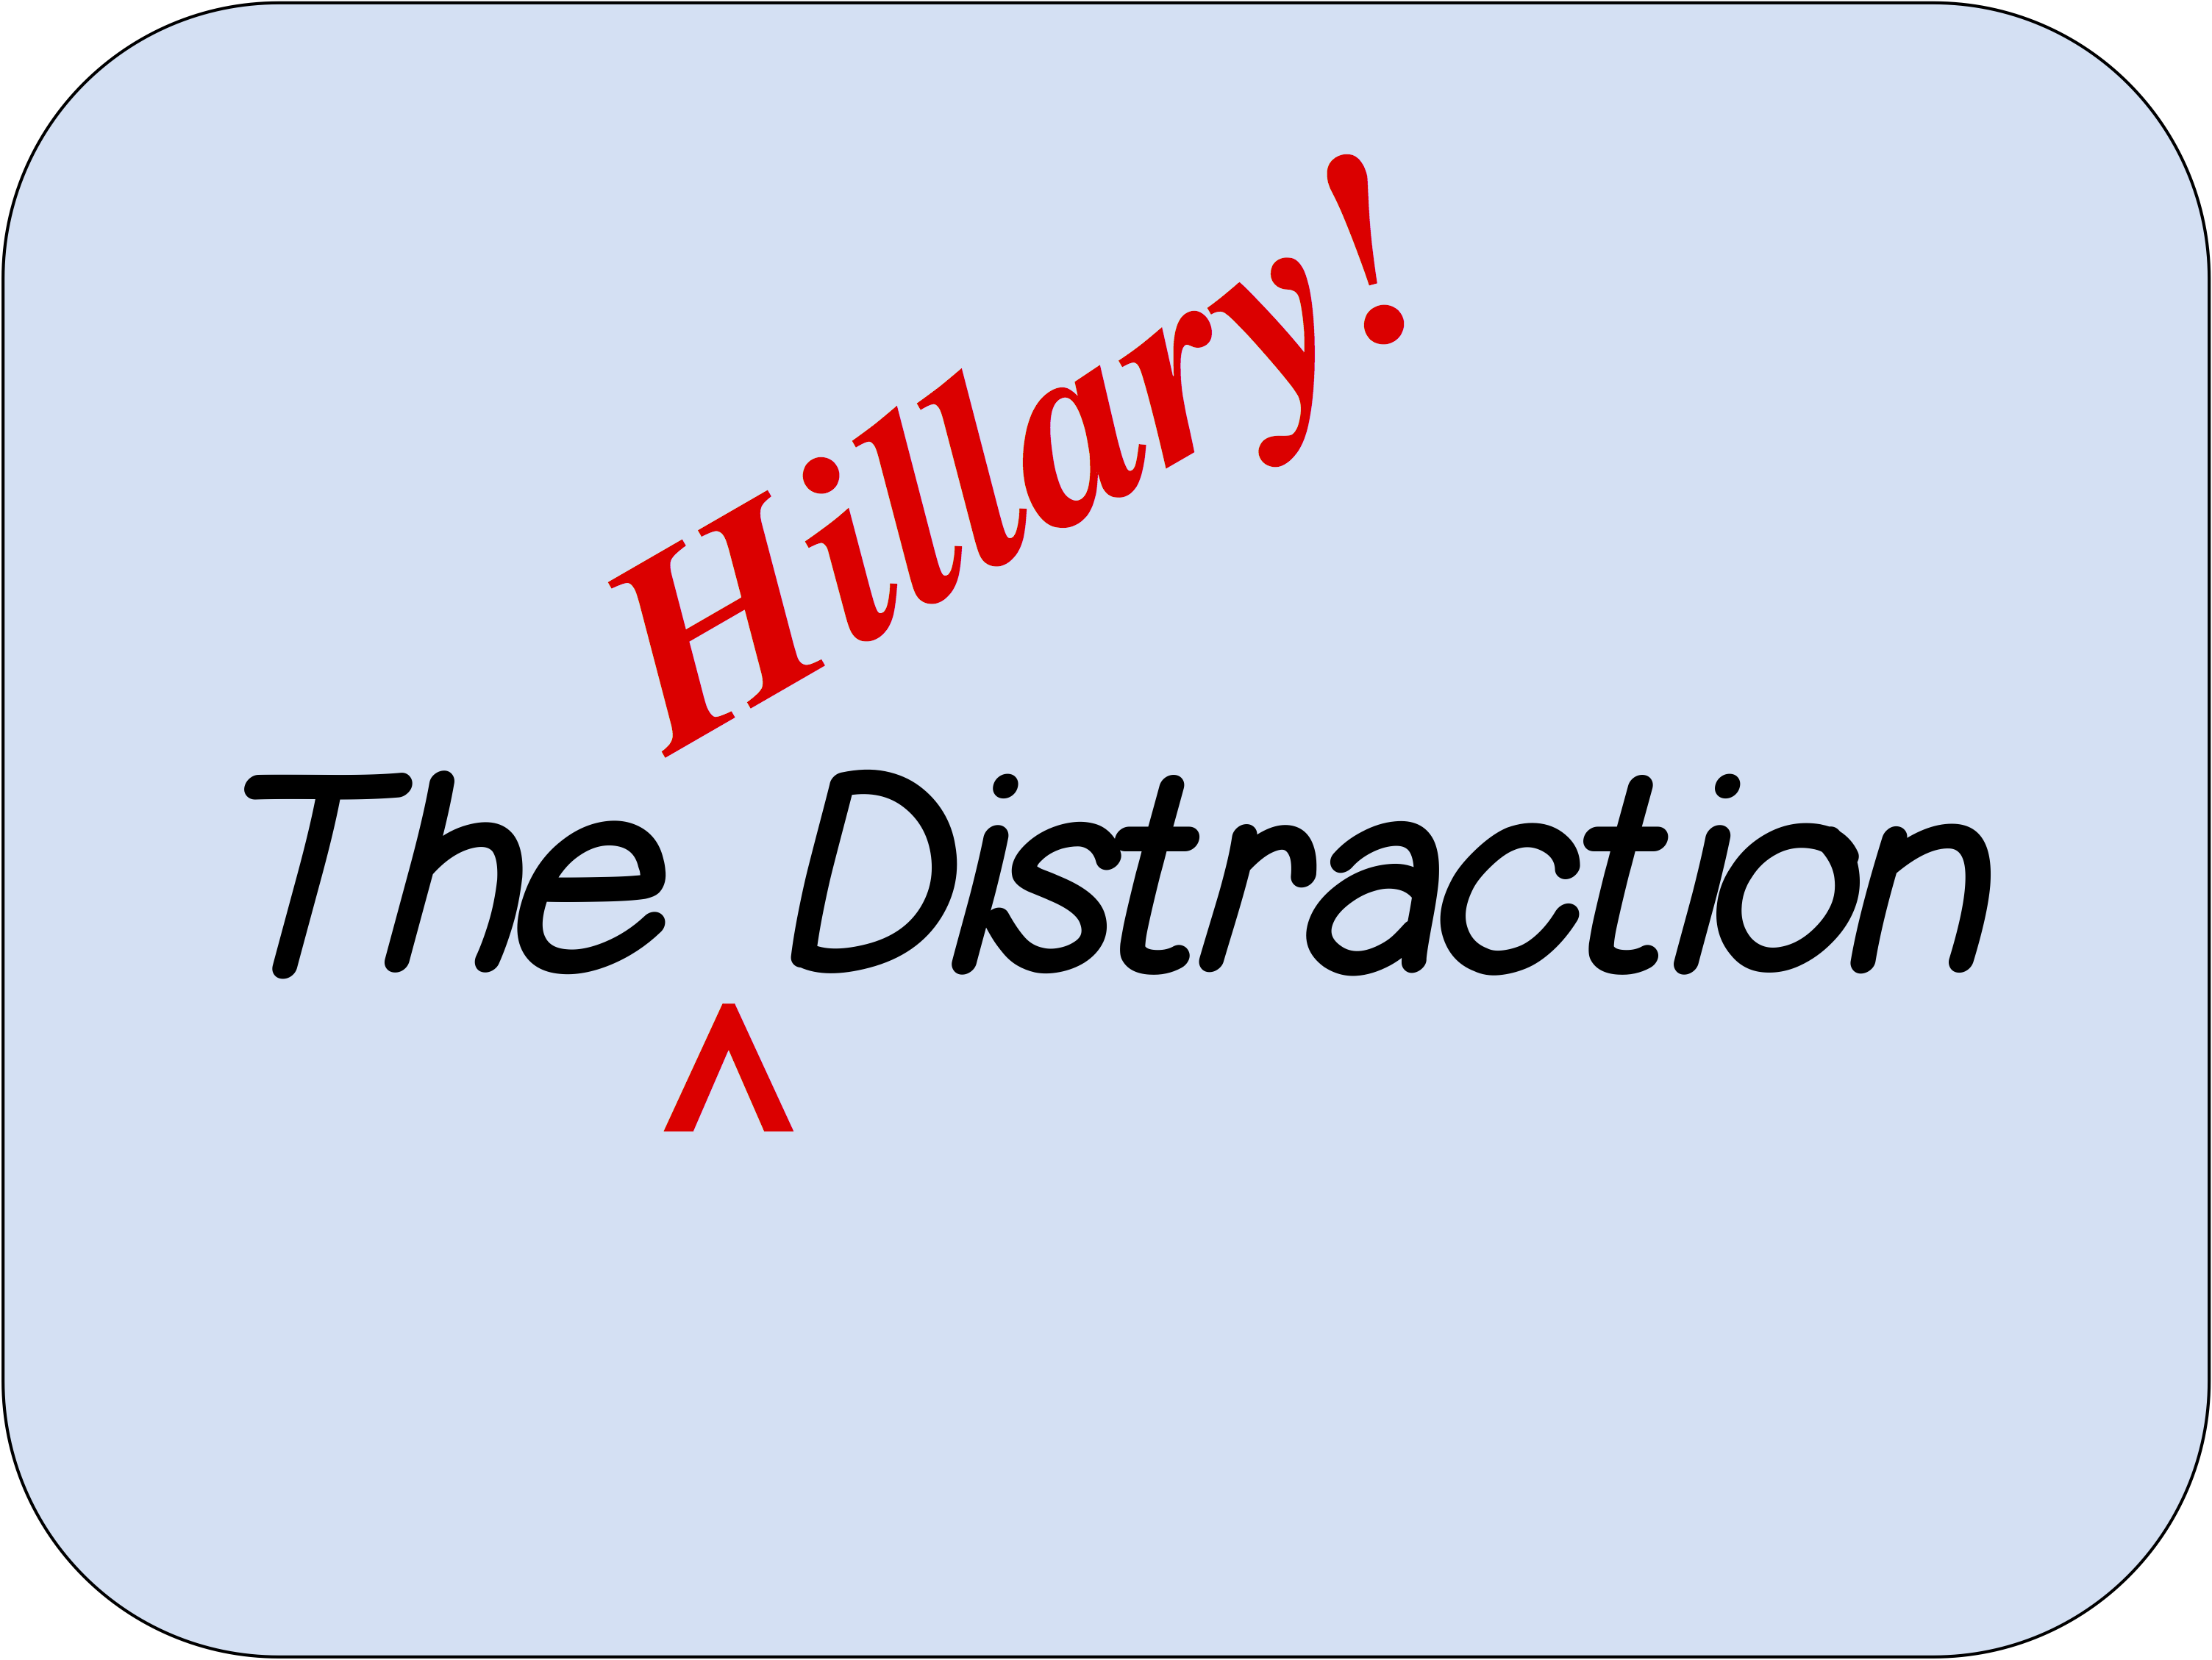 The Hillary Distraction